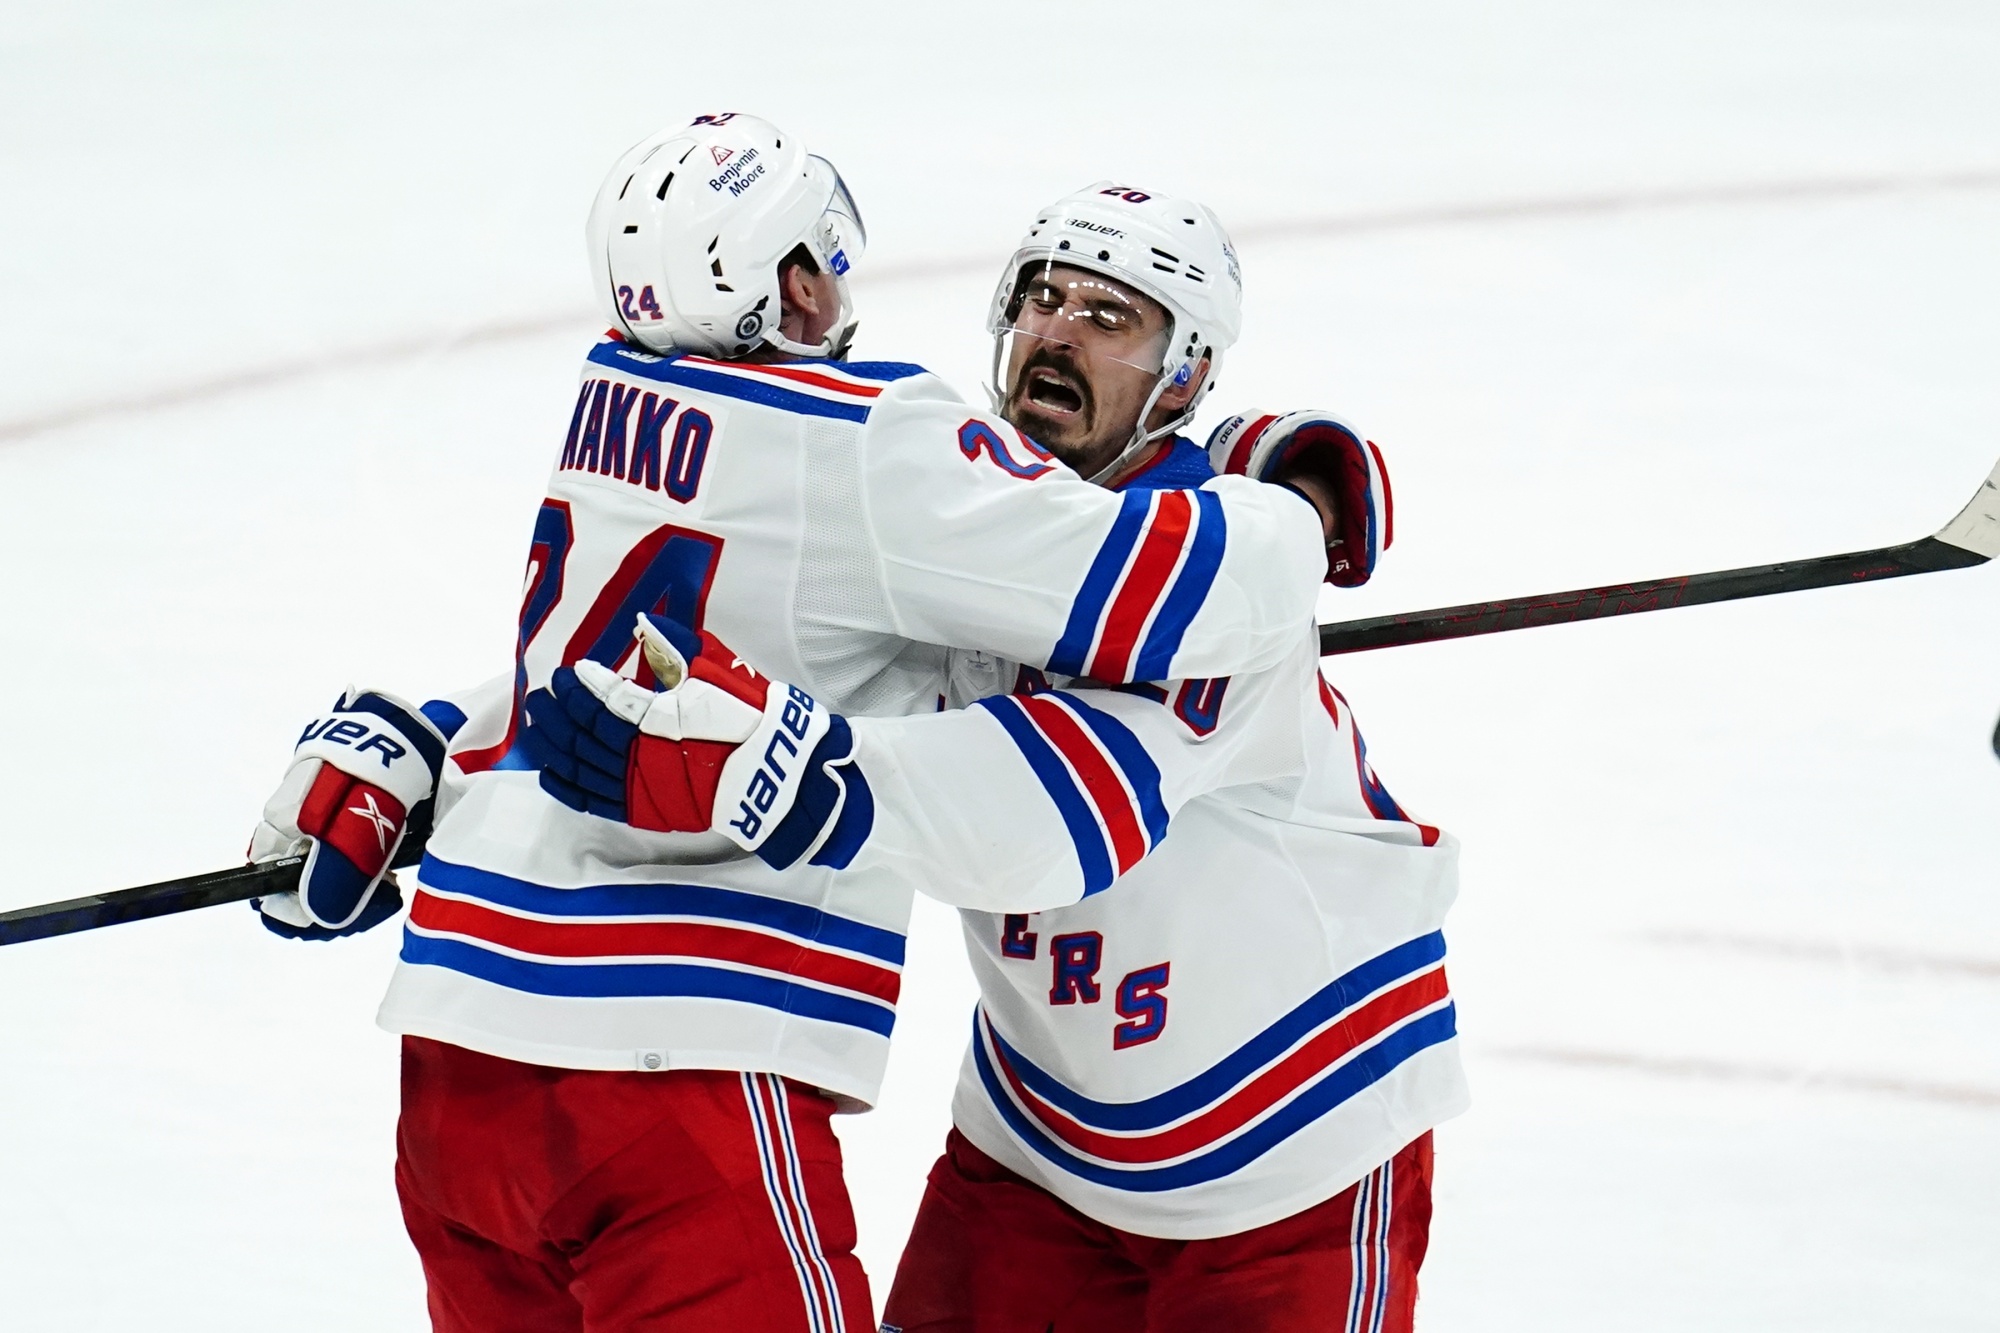 A SHORTHANDED BREAKAWAY GOAL FOR KREIDER. CK HAVE IT YOUR WAY